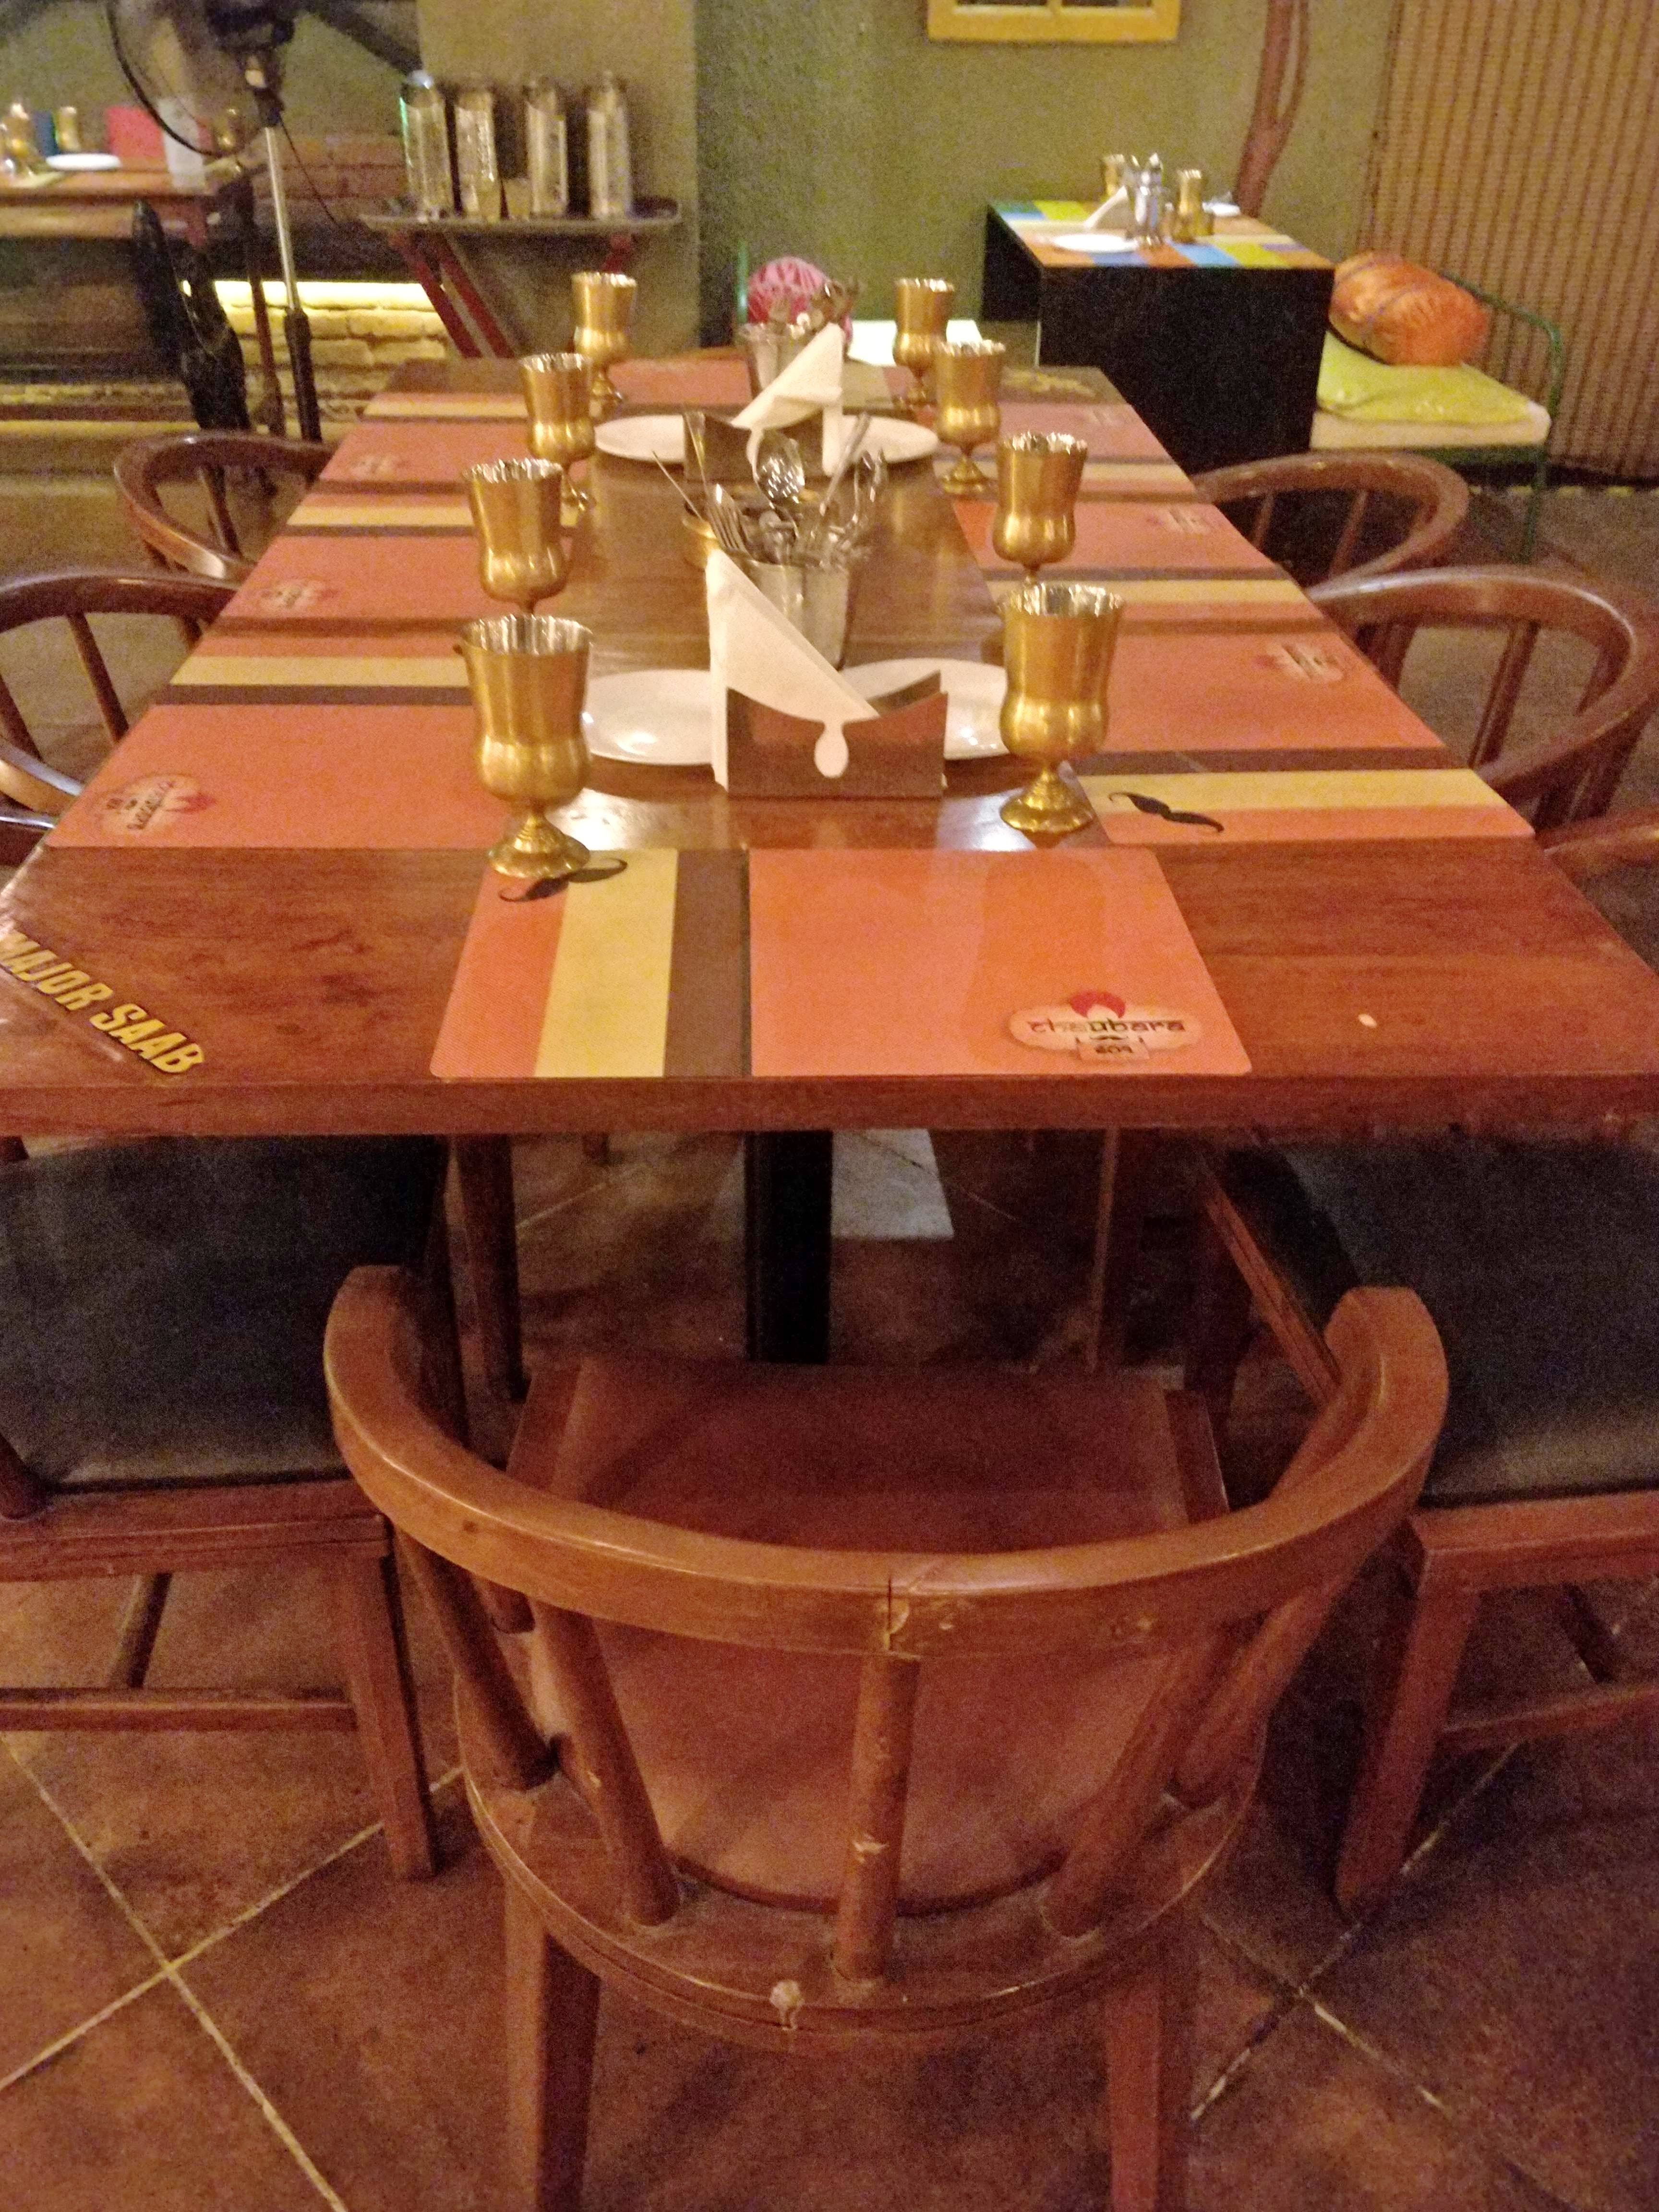 Table,Furniture,Chair,Room,Restaurant,Kitchen & dining room table,Hardwood,Wood,Dining room,Outdoor table